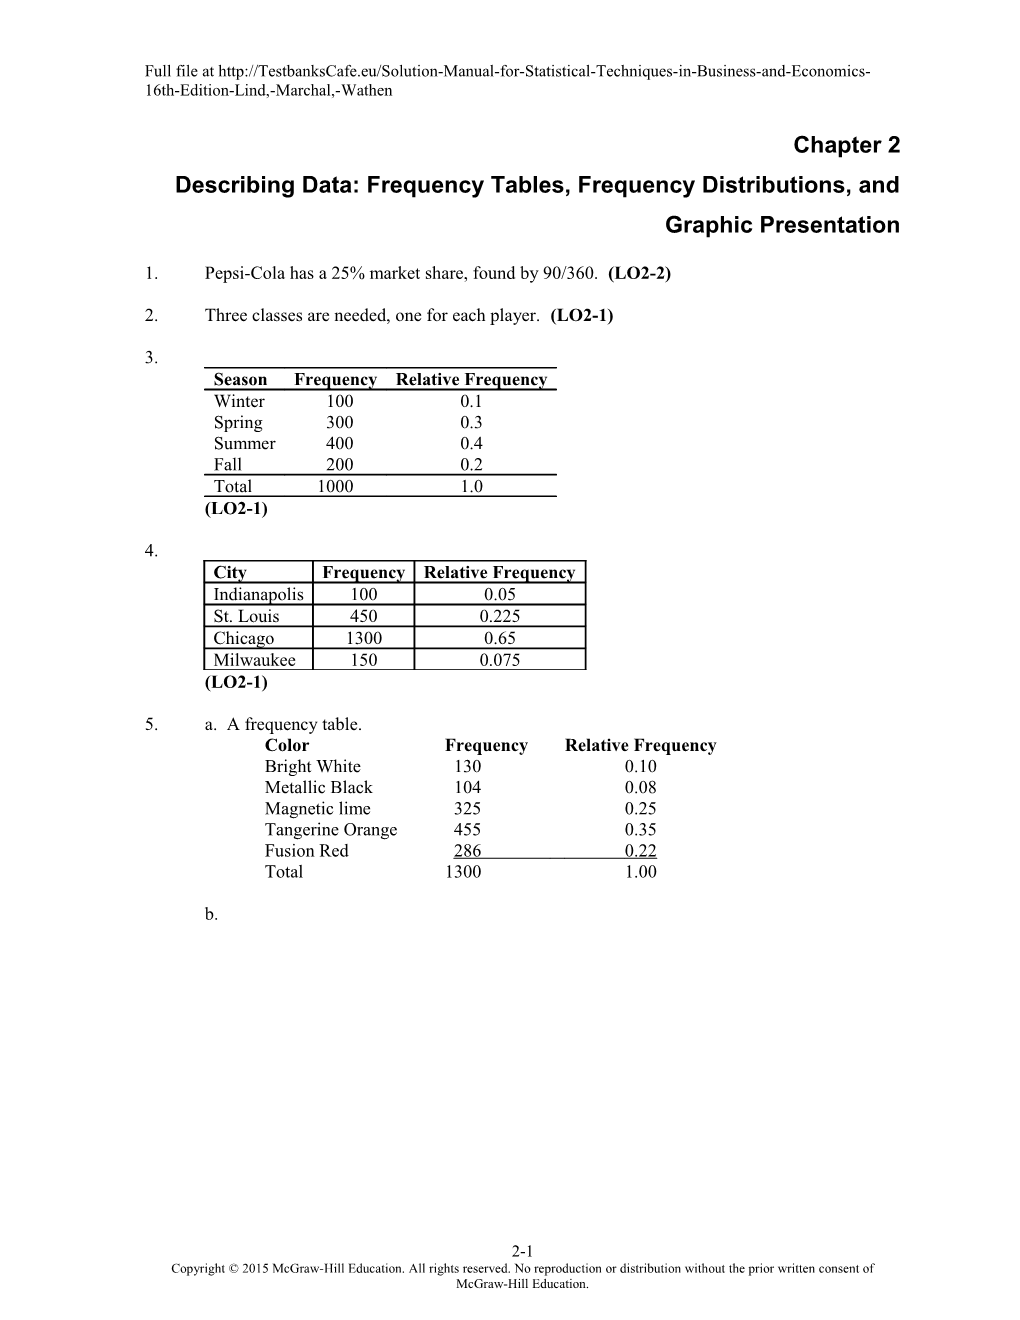 Describing Data: Frequency Tables, Frequency Distributions, and Graphic Presentation